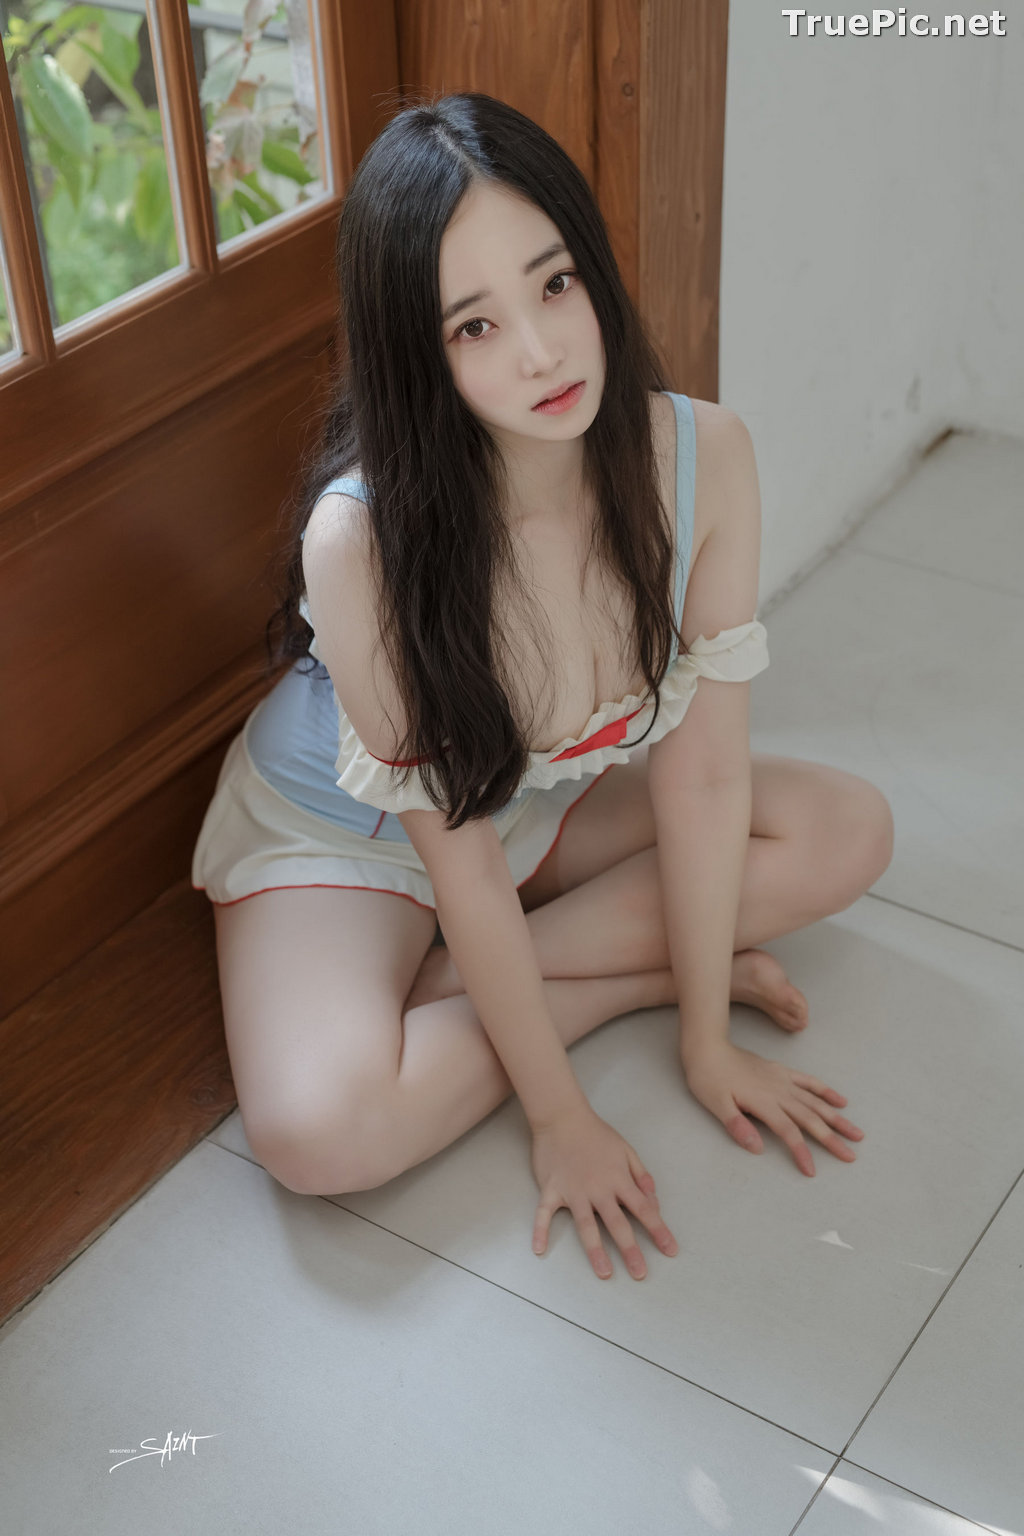 Image Korean Cute and Sexy Model - BamBi - Best Picture Collection 2020 - TruePic.net - Picture-24